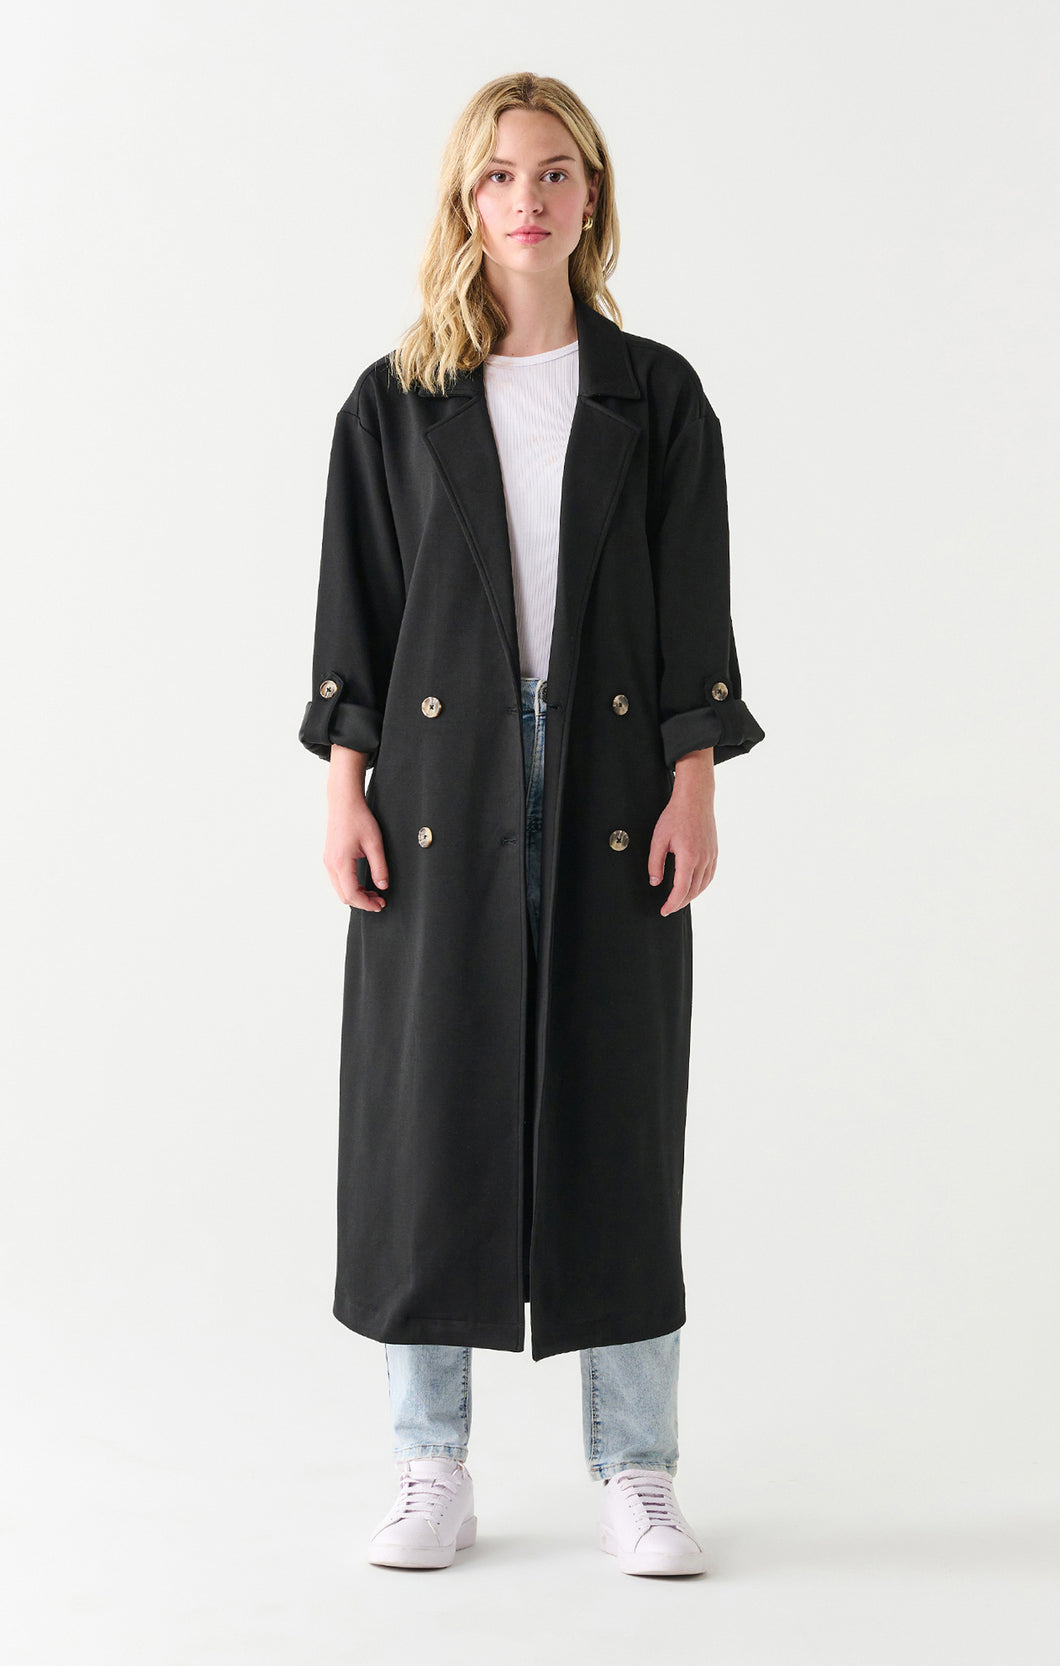 THE KNIT TRENCH